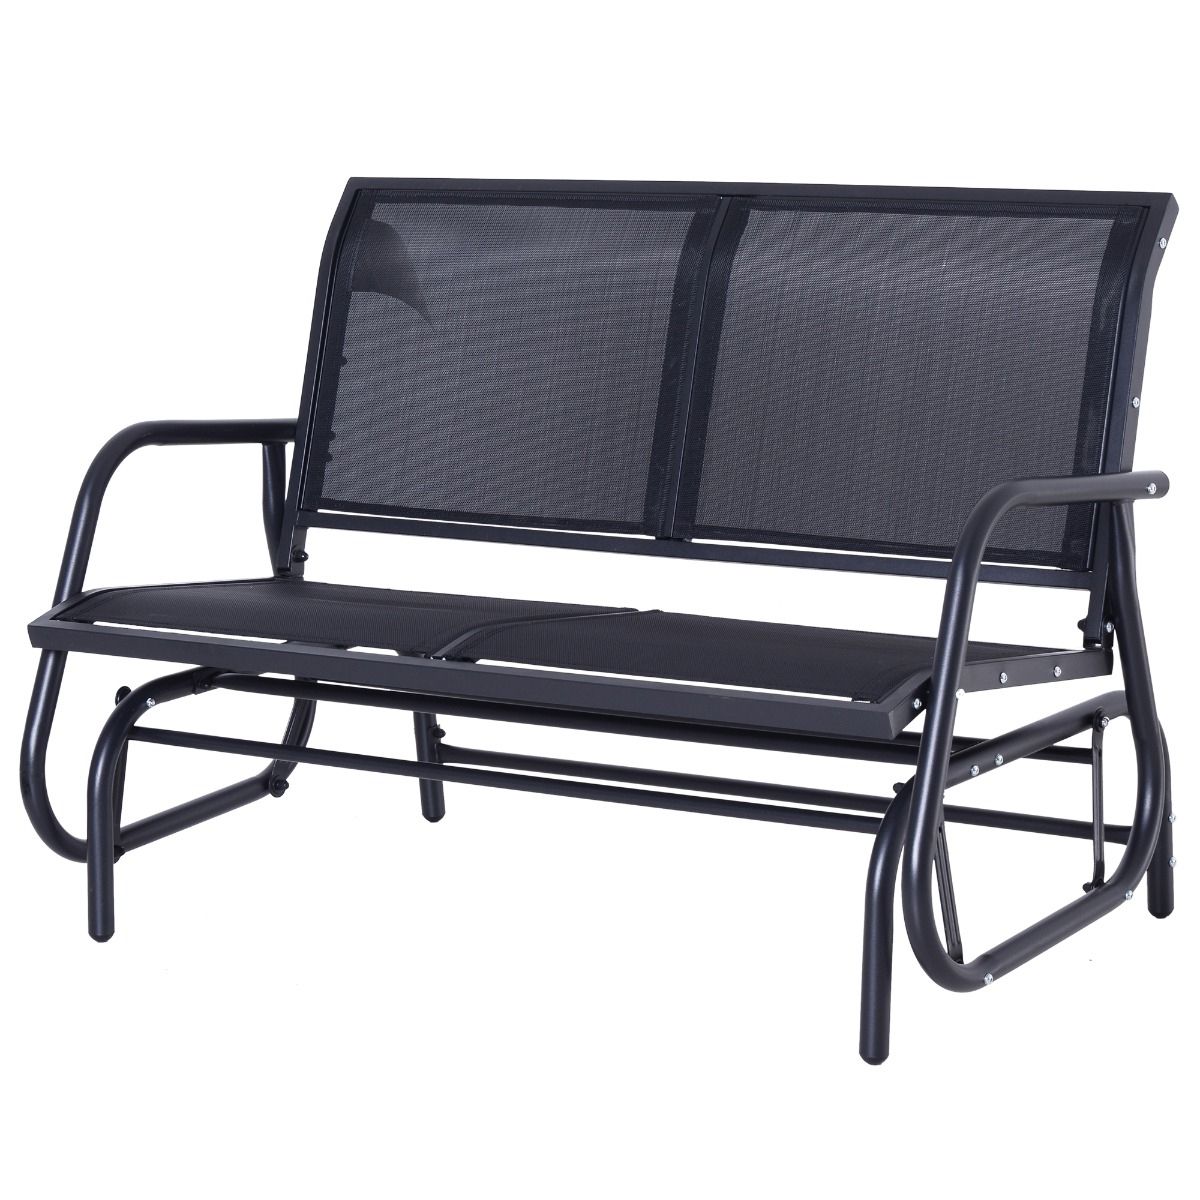 Iron Double Patio Glider Benches For 2020 Outsunny Patio Double Glider Bench Swing Chair Rocker Heavy Duty Outdoor  Garden Black (View 14 of 30)